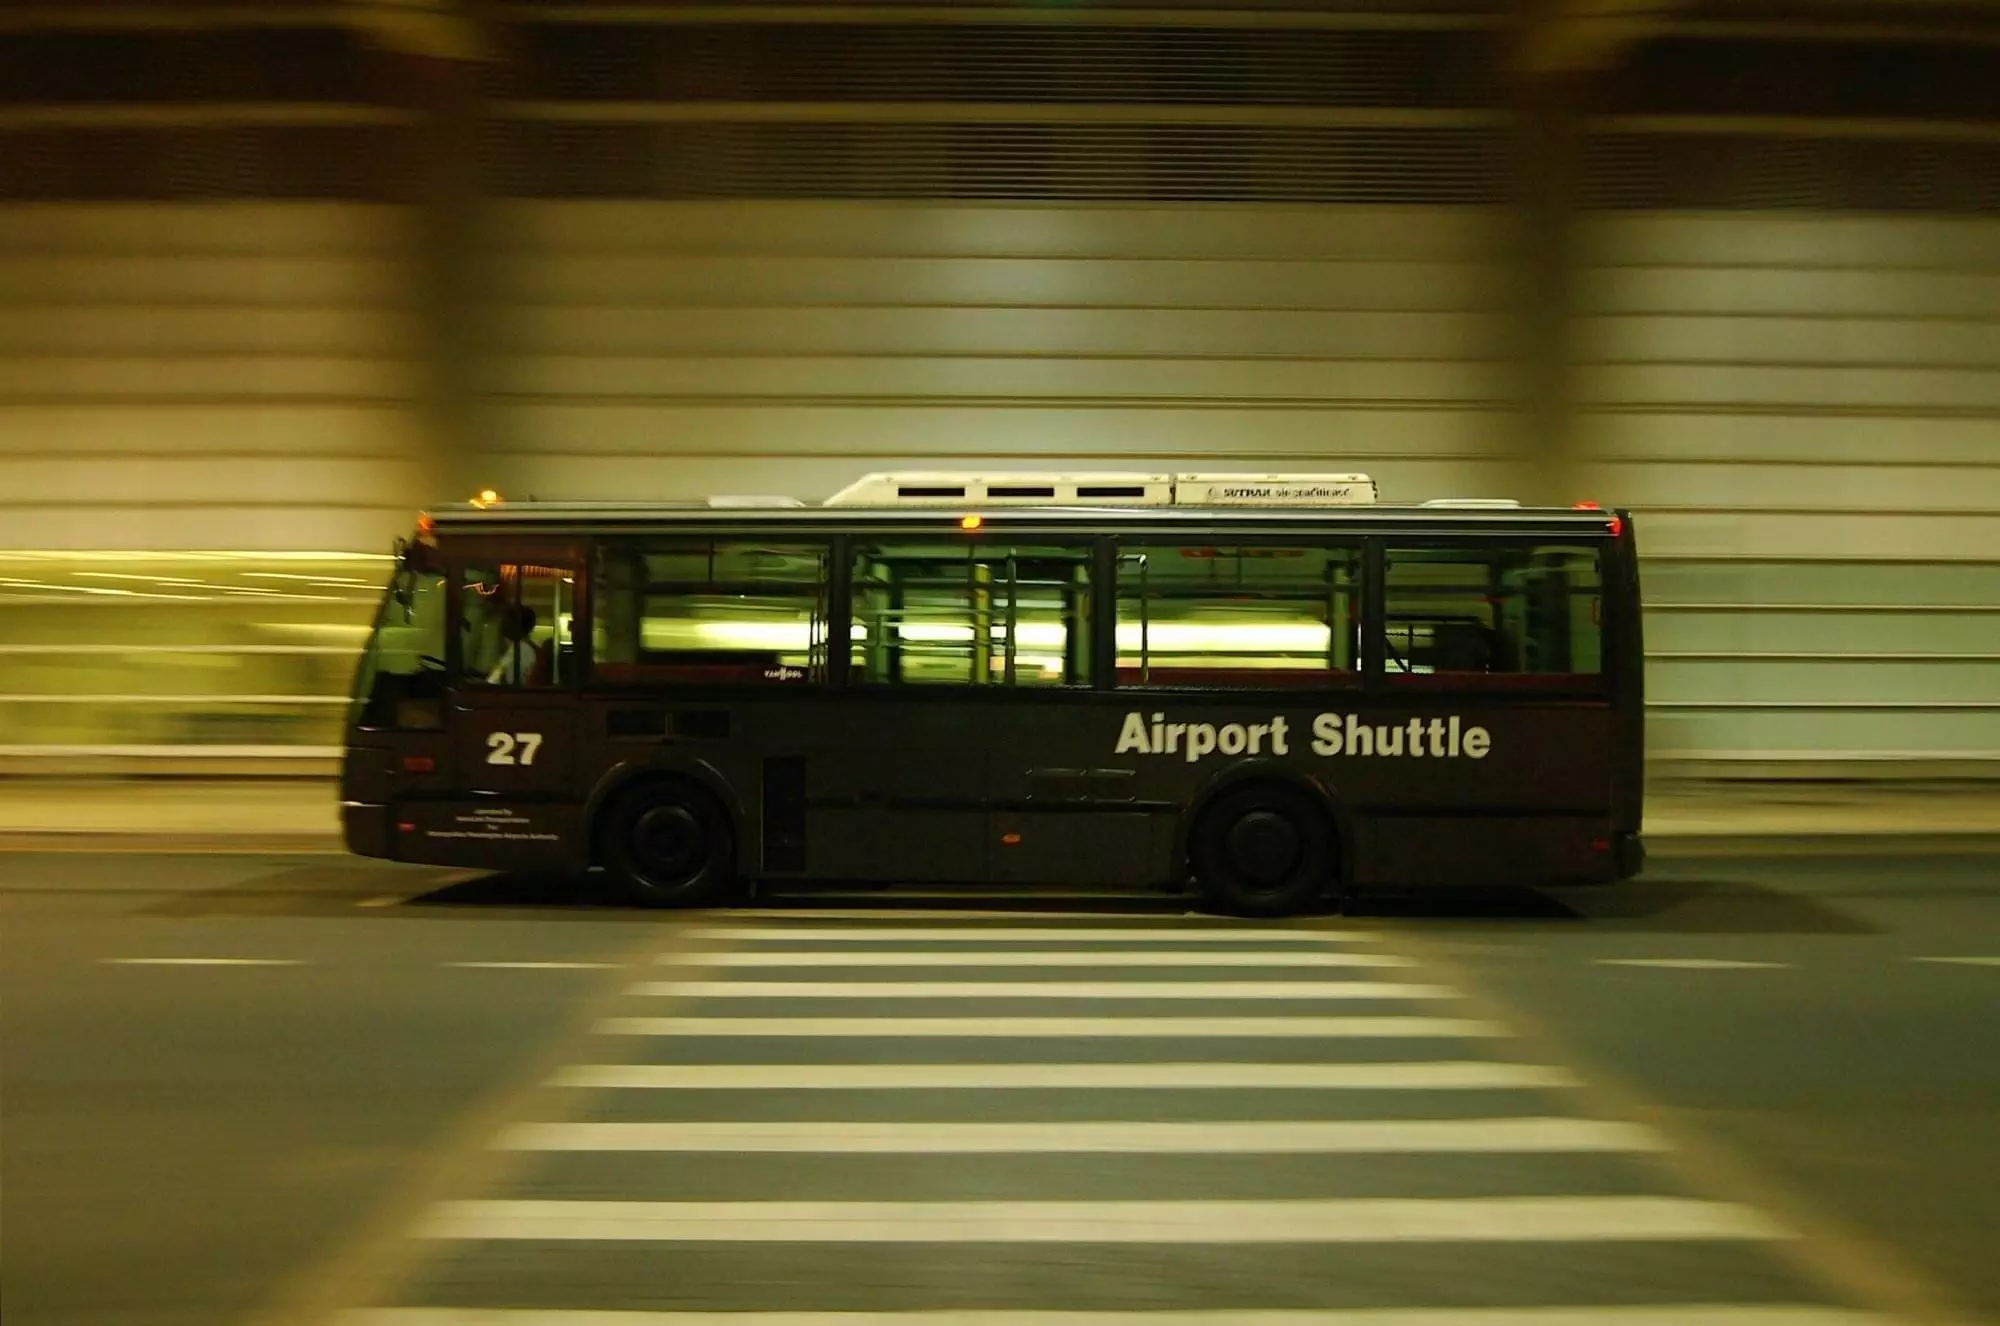 An airport bus running on the road.